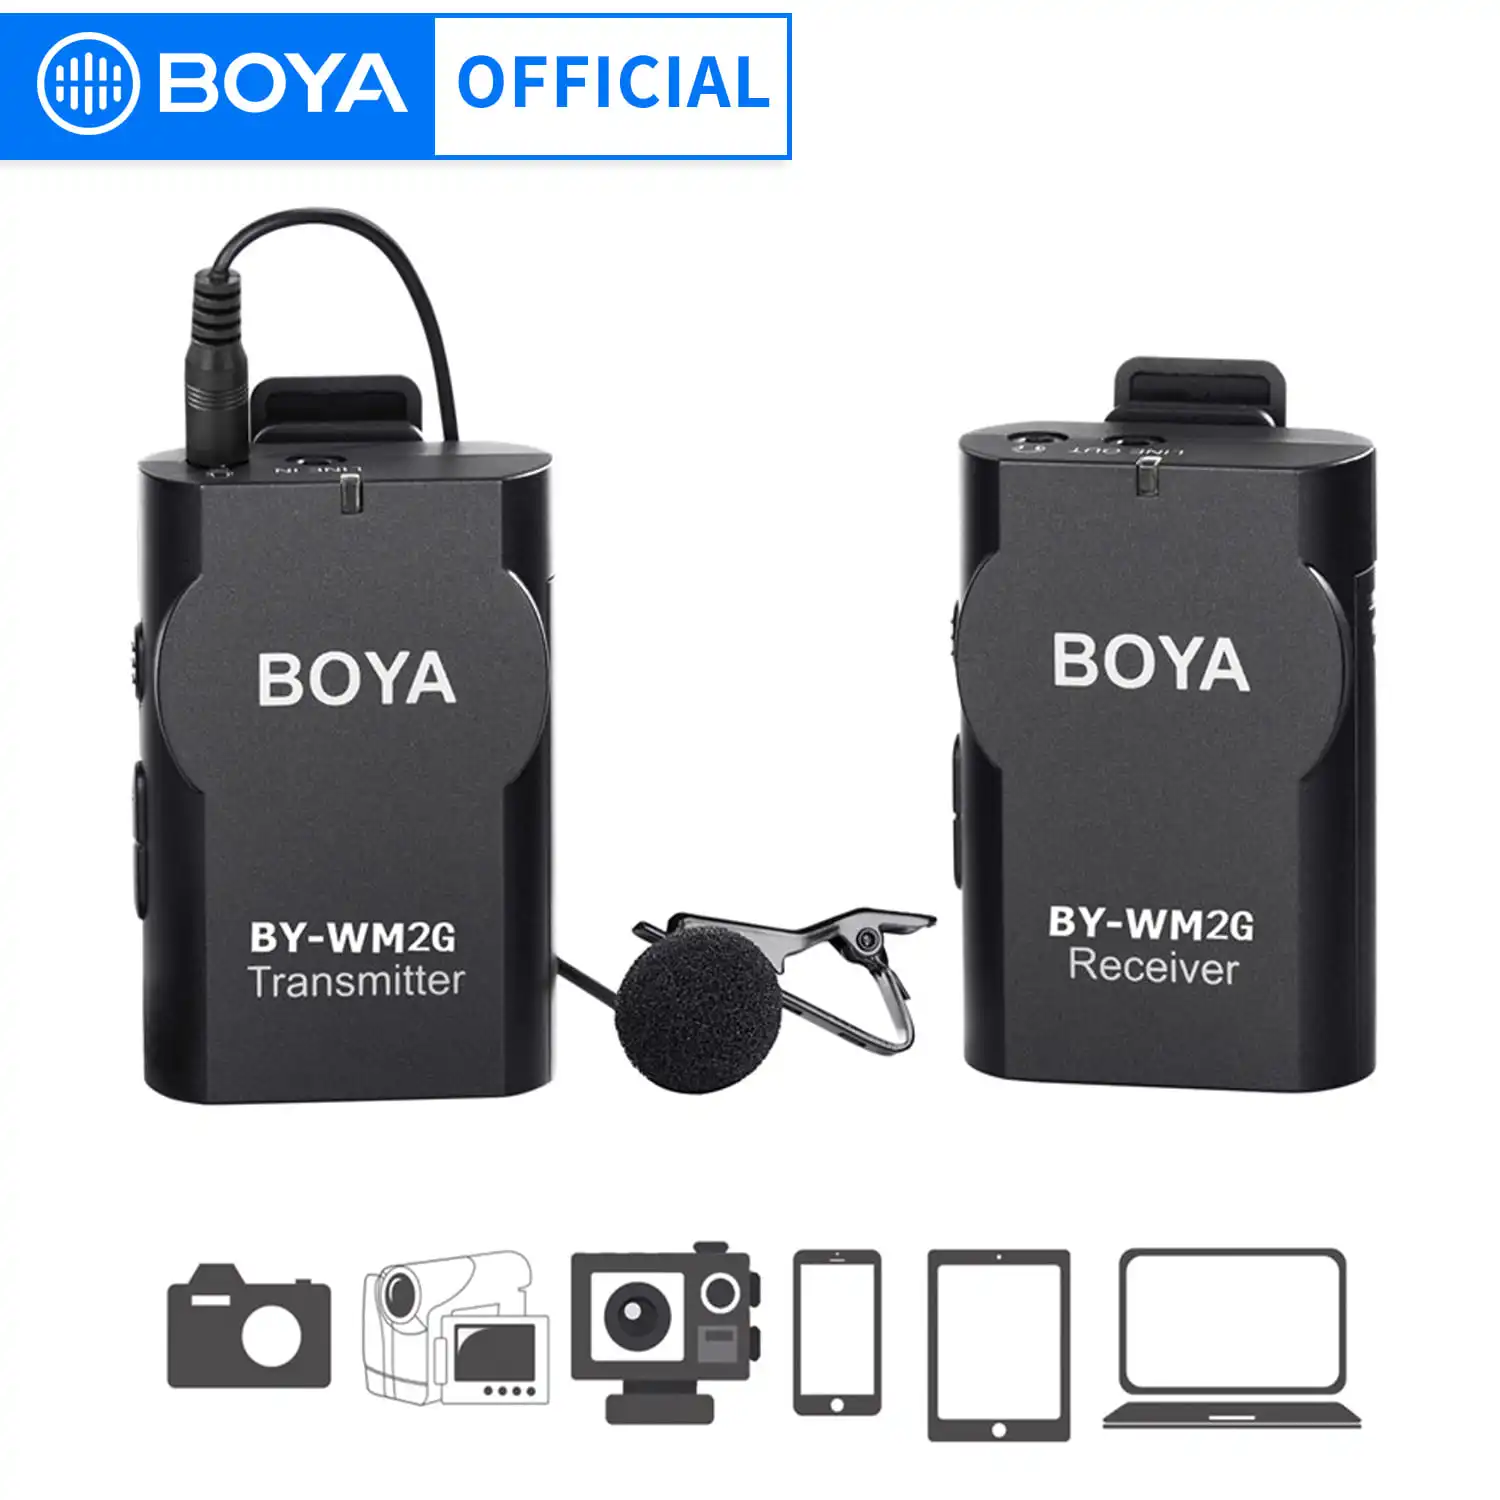 BOYA BY-WM2G Wireless Lavalier Microphone with GoPro Cable Convertor for Podcast Hero3 3+ 4 IOS Phone iPad Tablet DSLR Camera